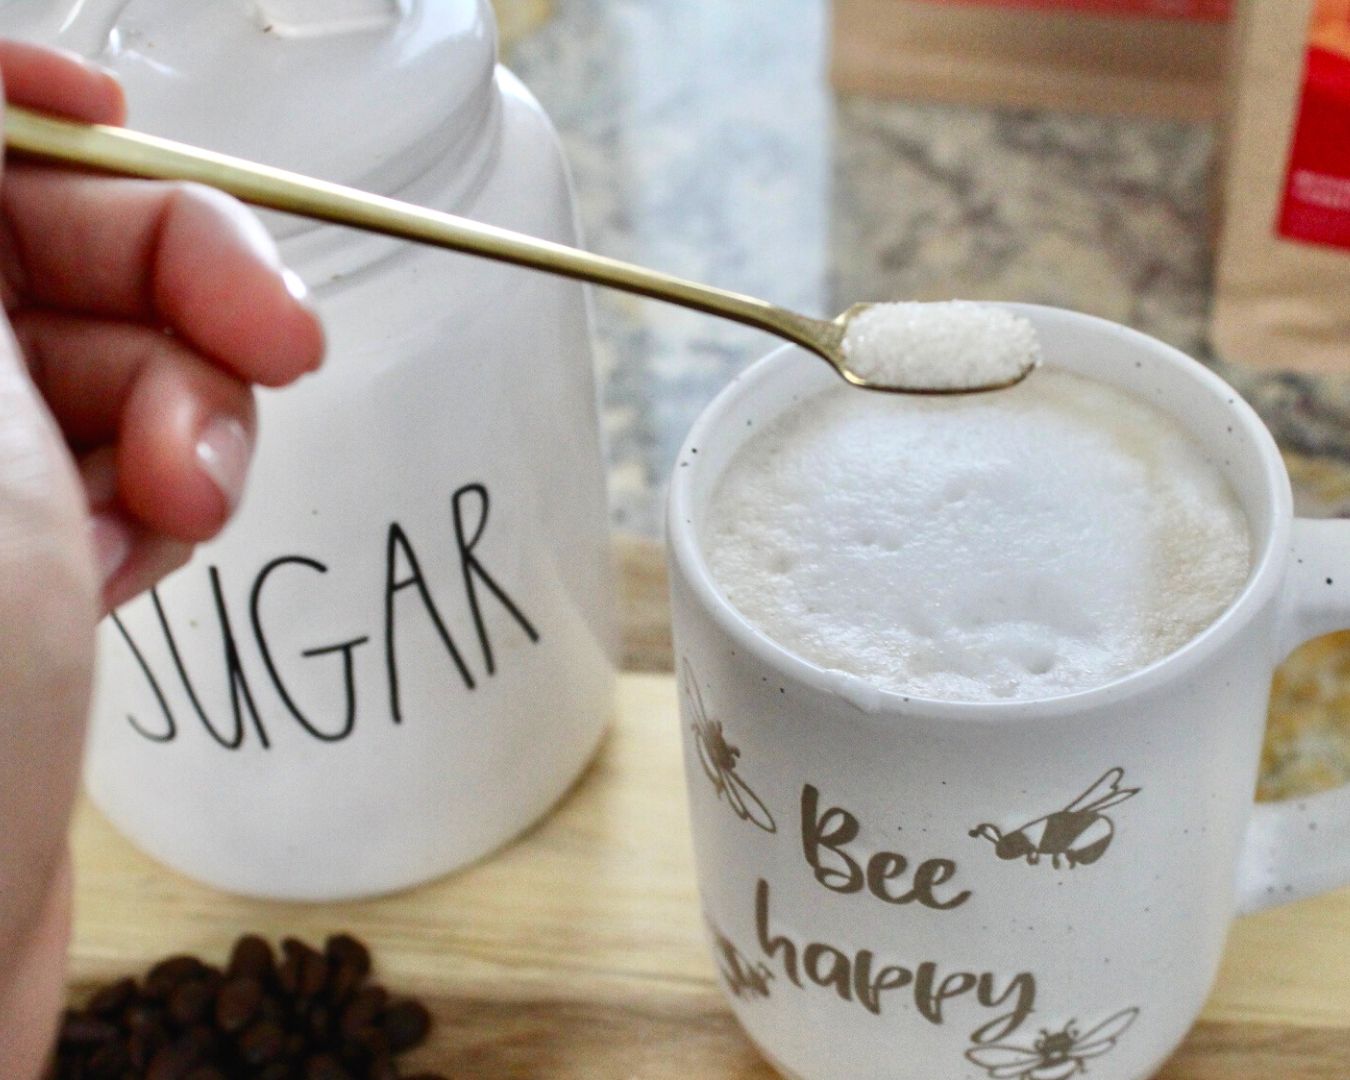 Adding sugar to a cup of coffee